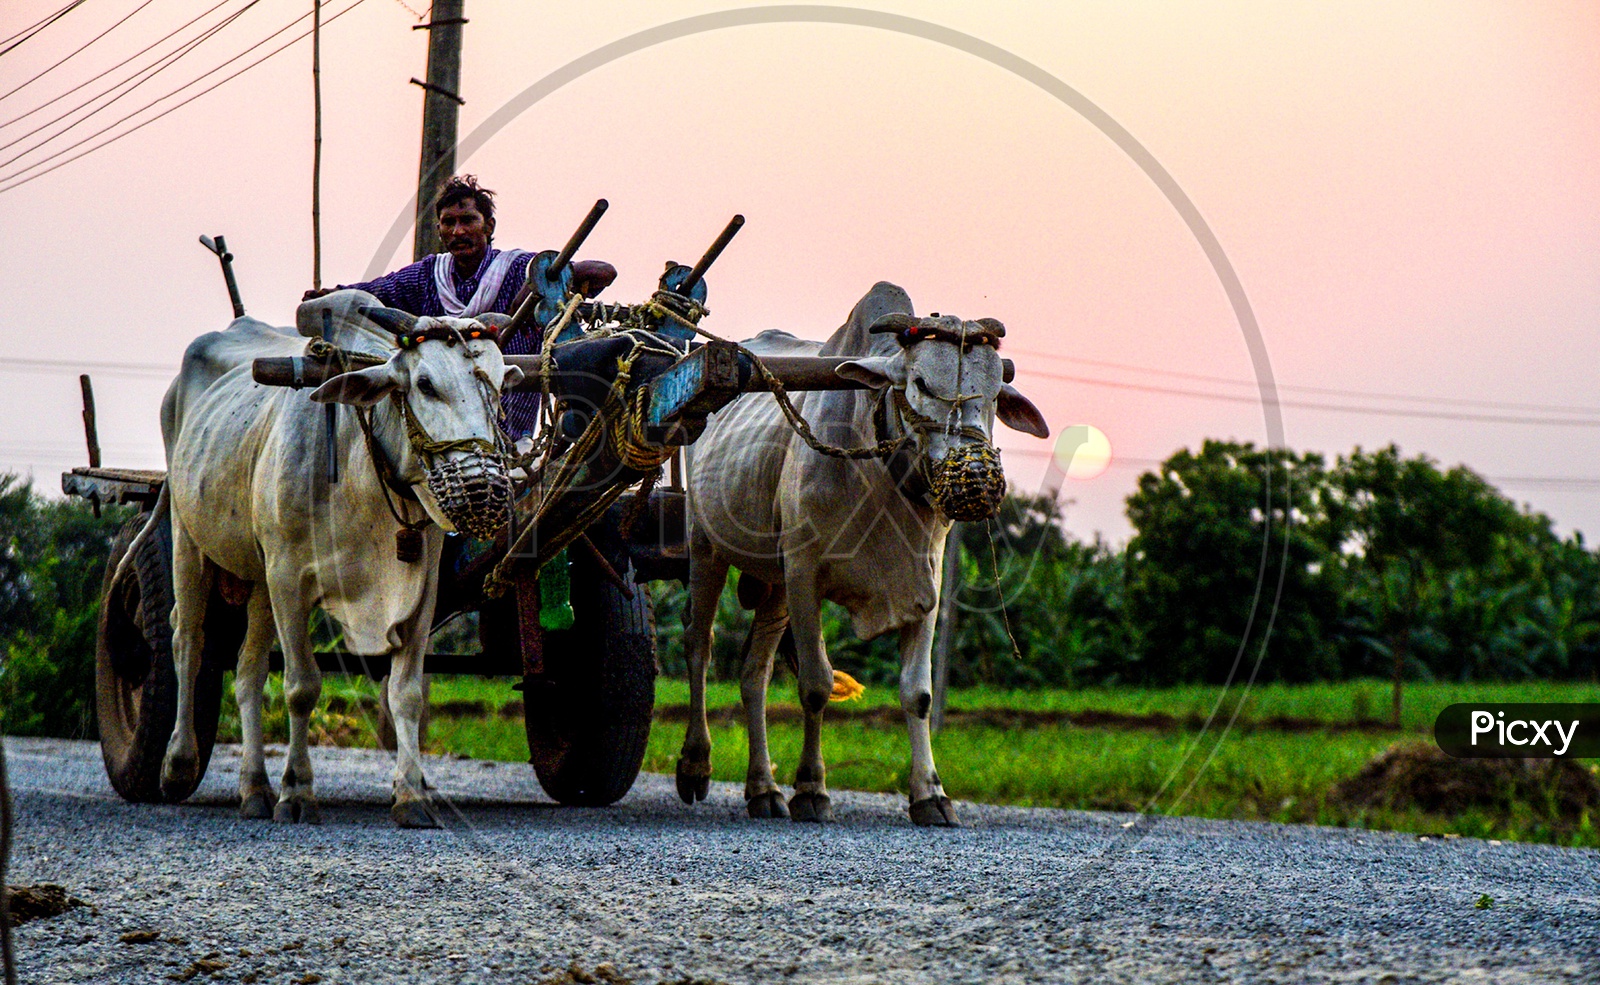 Bullock cart on the road during sunset